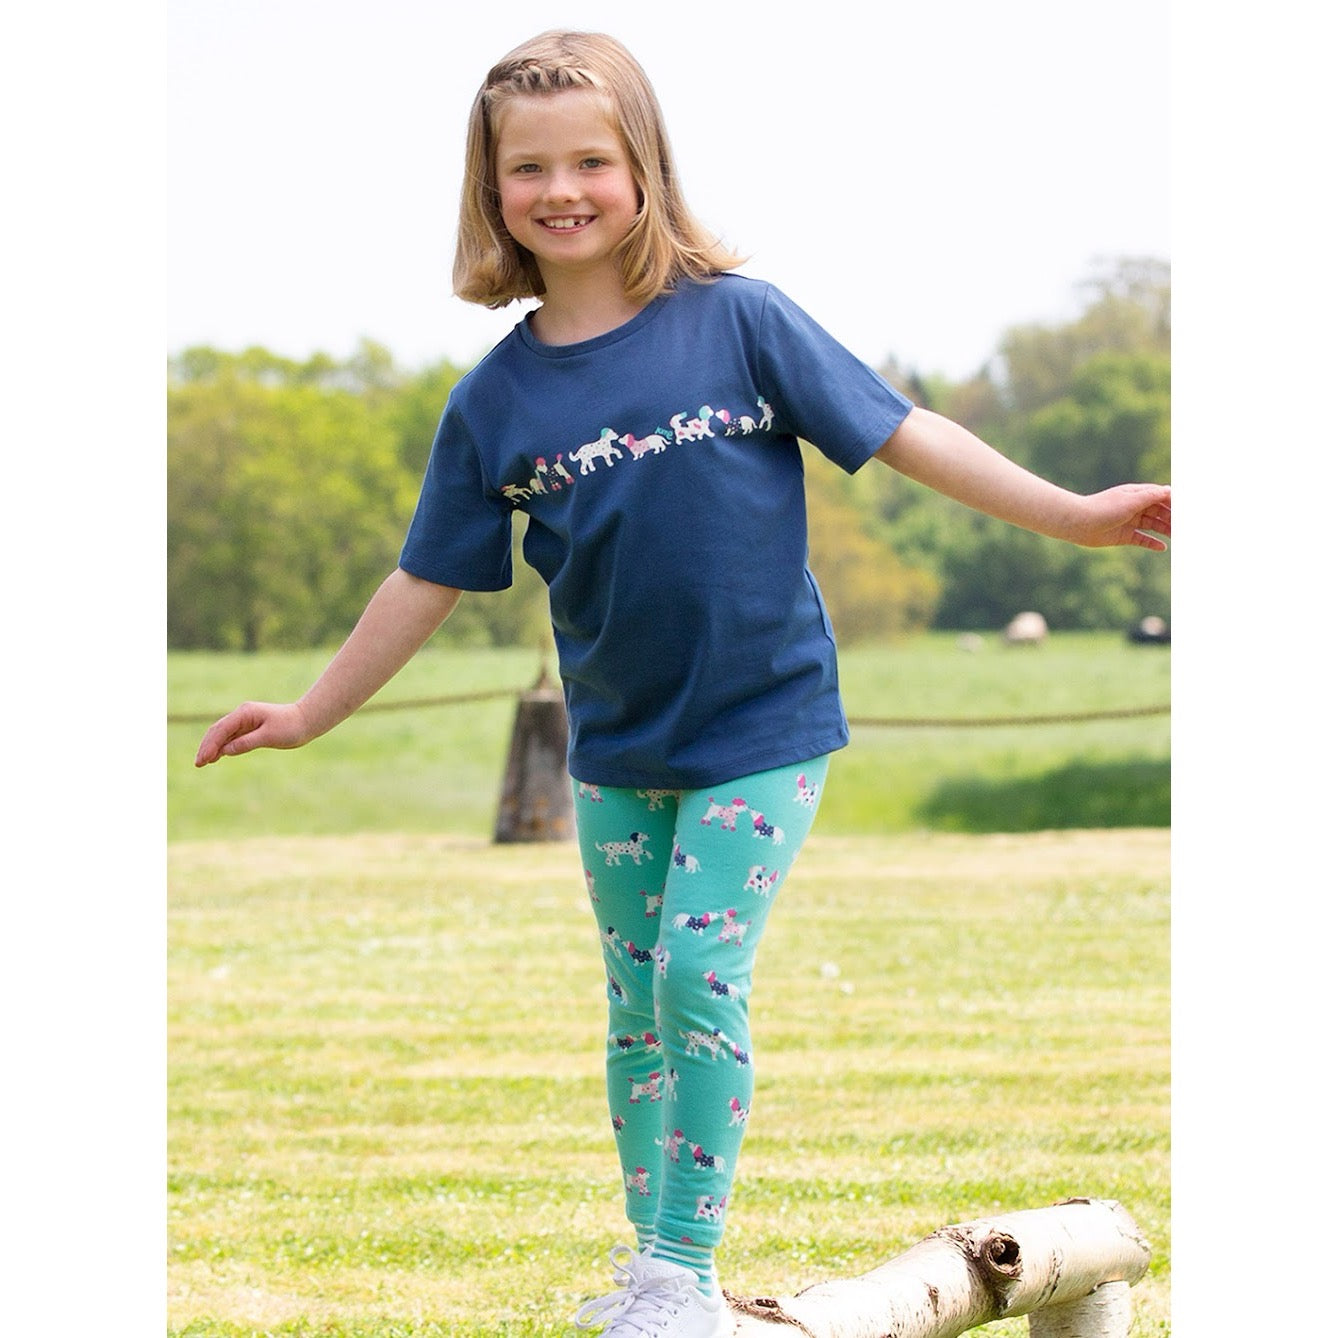 Kite Flora And Friends T-Shirt 41-F683 Clothing 3YRS / Indigo,4YRS / Indigo,5YRS / Indigo,6YRS / Indigo,7YRS / Indigo,8YRS / Indigo,9YRS / Indigo,10-11YRS / Indigo